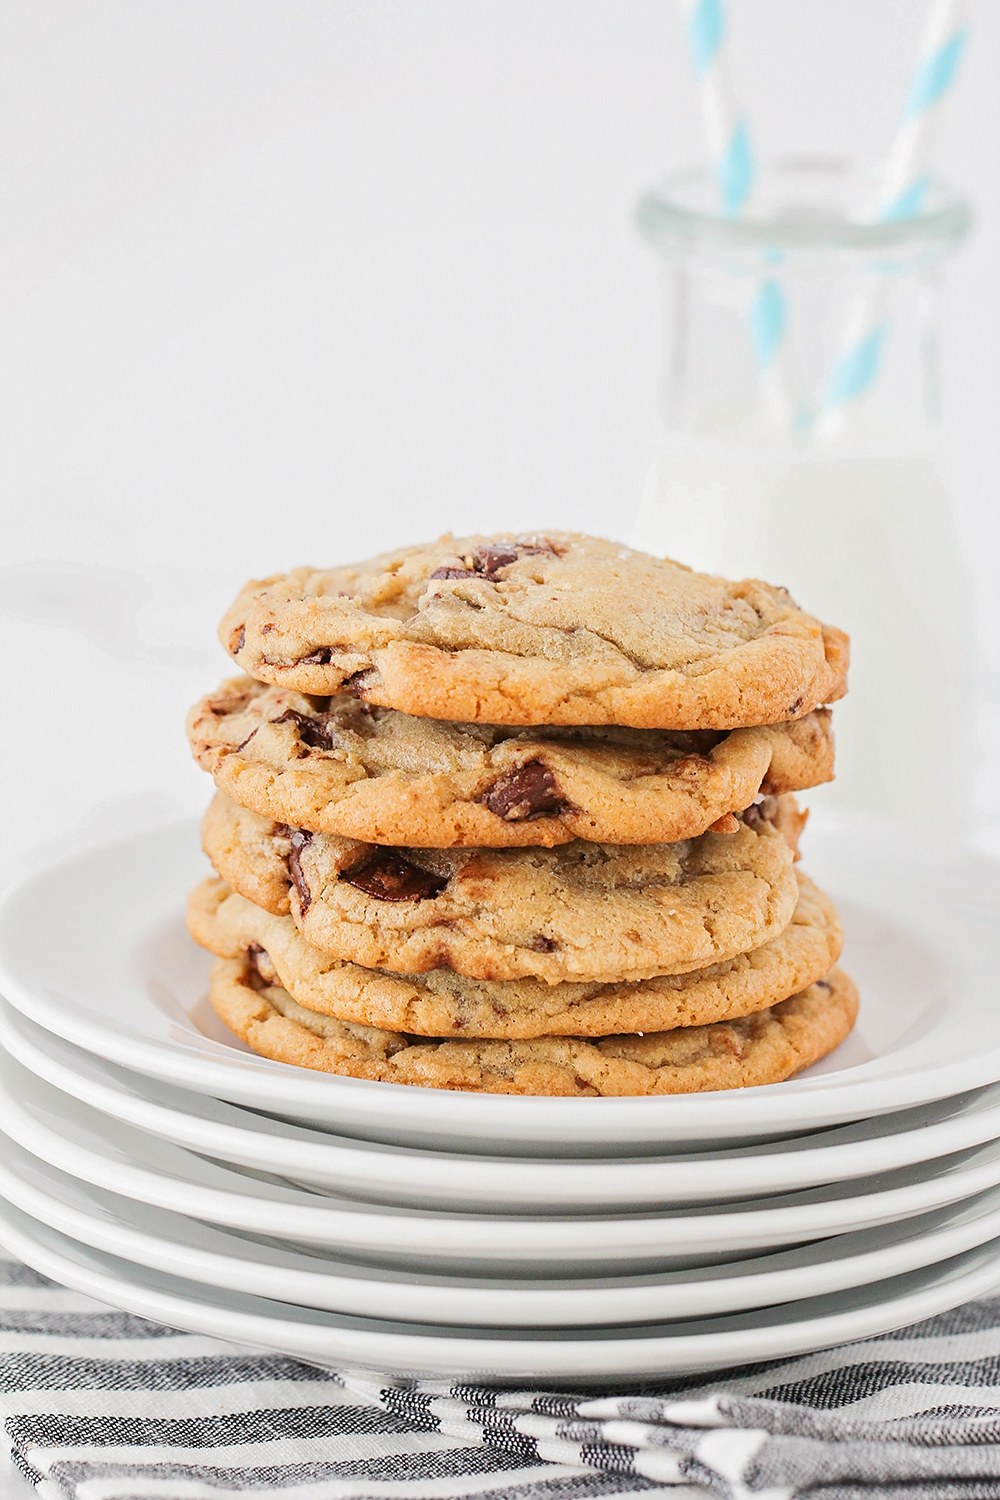 Want freshly baked, perfectly delicious cookies whenever the craving strikes? Follow these simple step by step instructions to freeze cookie dough, for the best results every time!